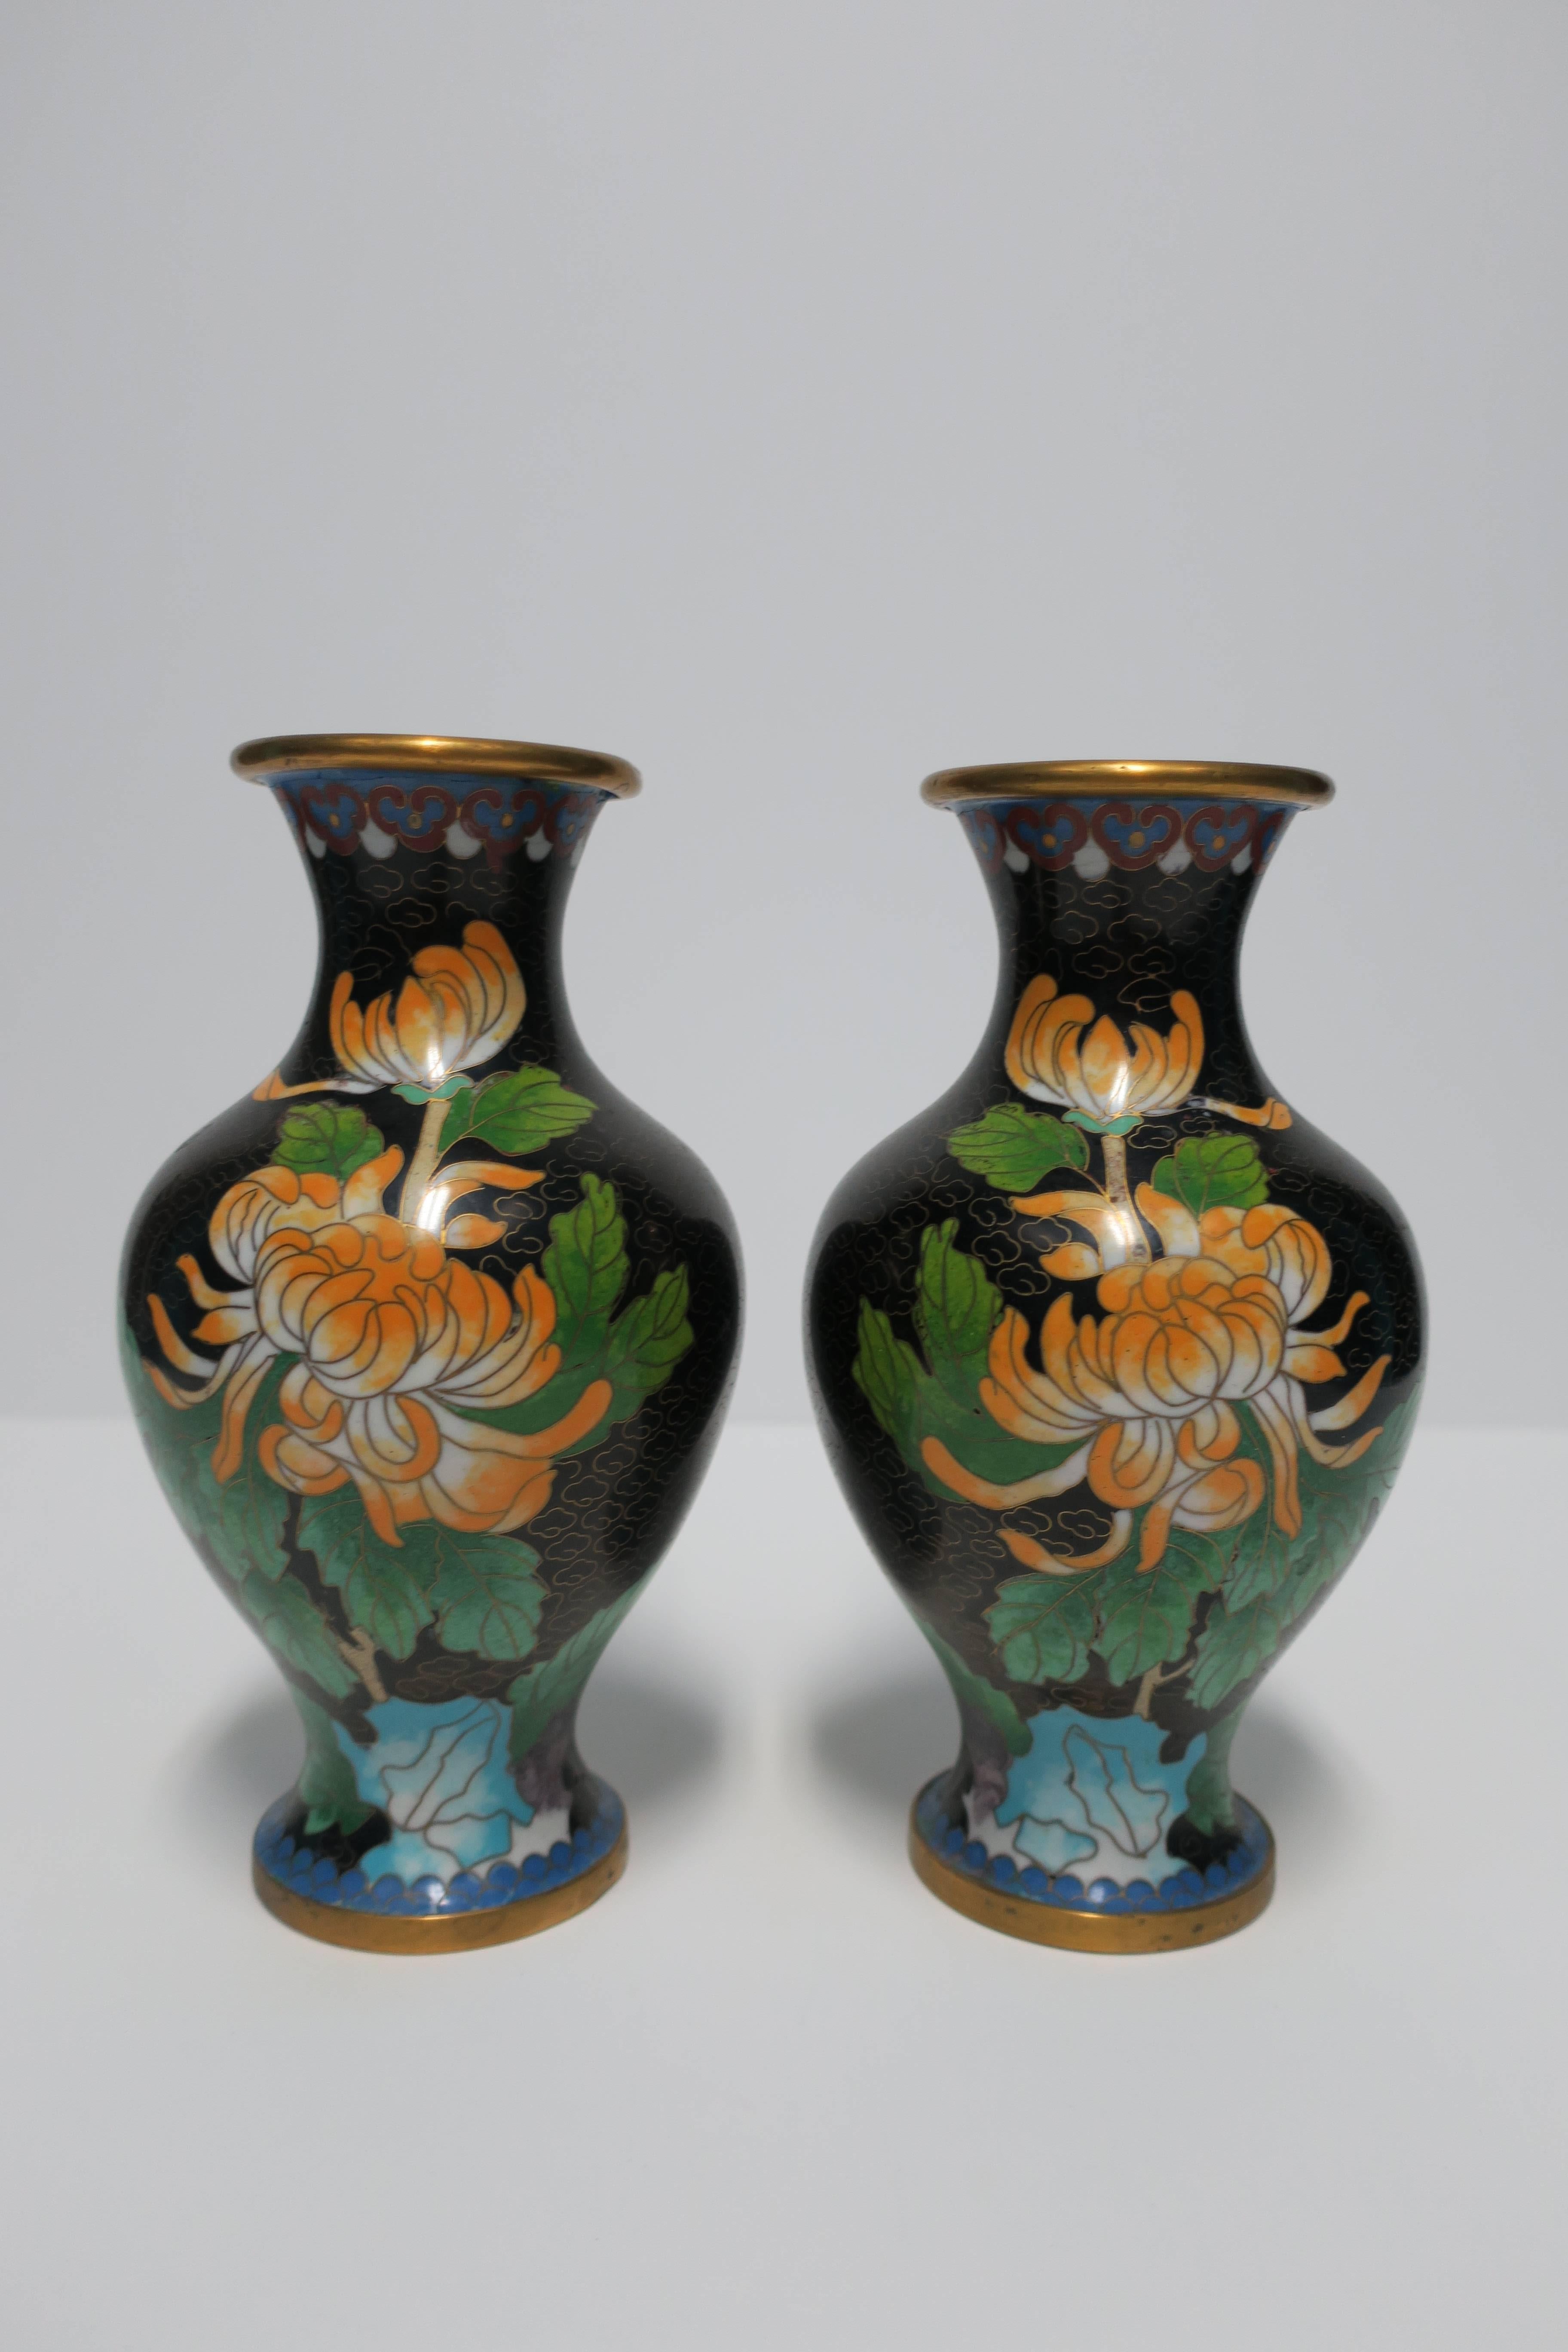 20th Century Black and Green Cloisonné́ Enamel and Brass Flower Vases, Pair For Sale